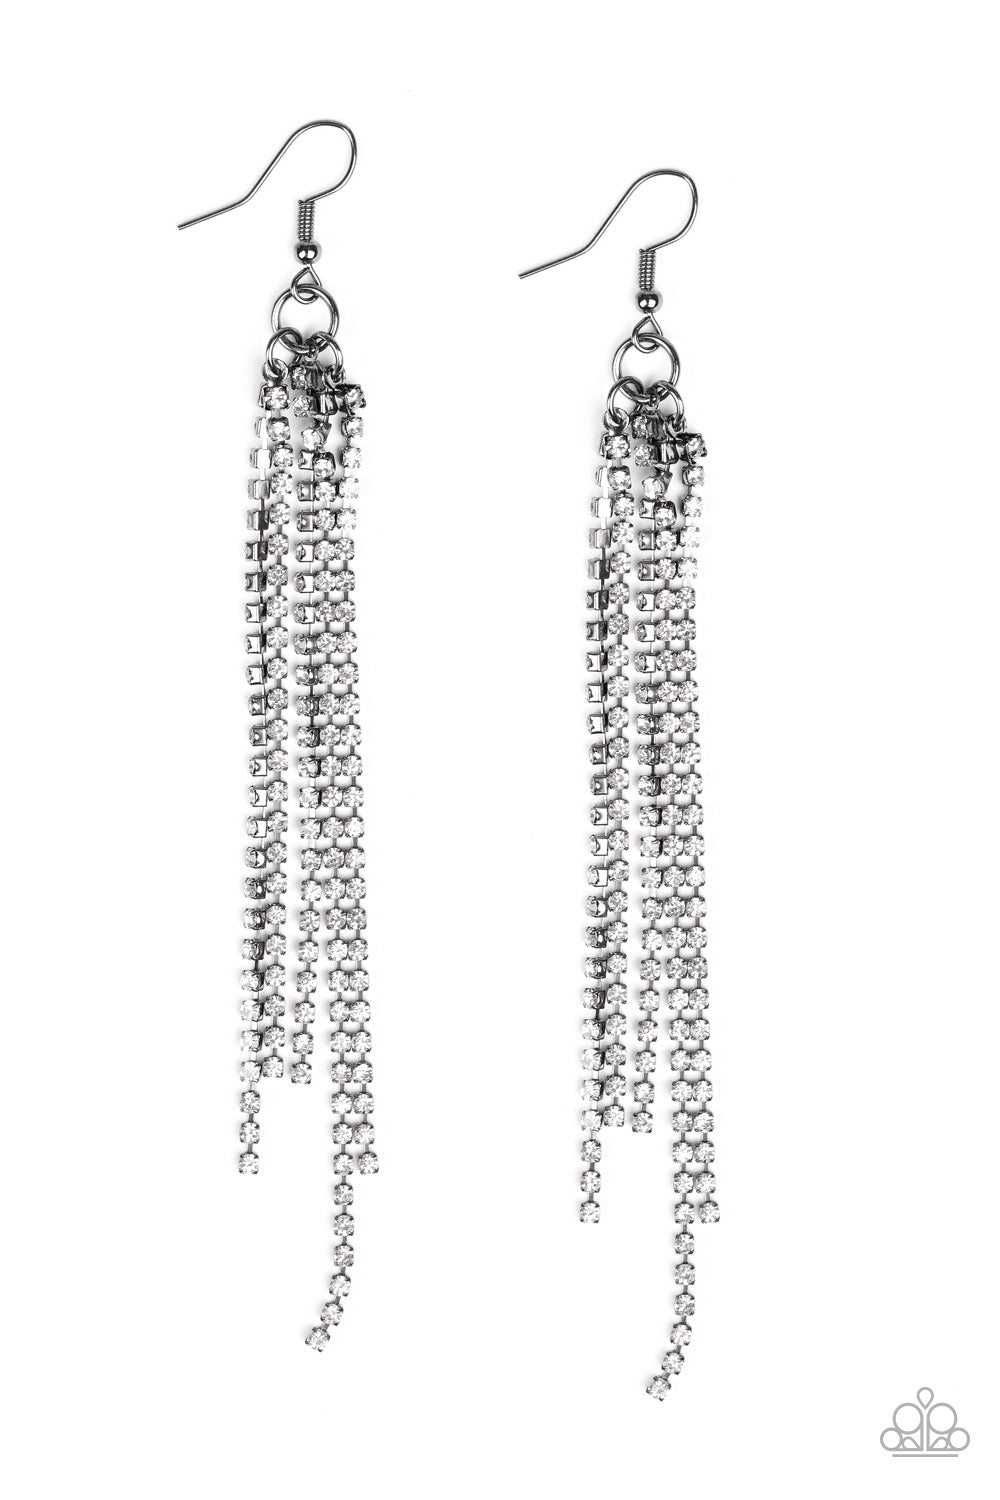 Paparazzi Center Stage Status Black Fishhook Earrings - Life Of The Party Exclusive December 2019